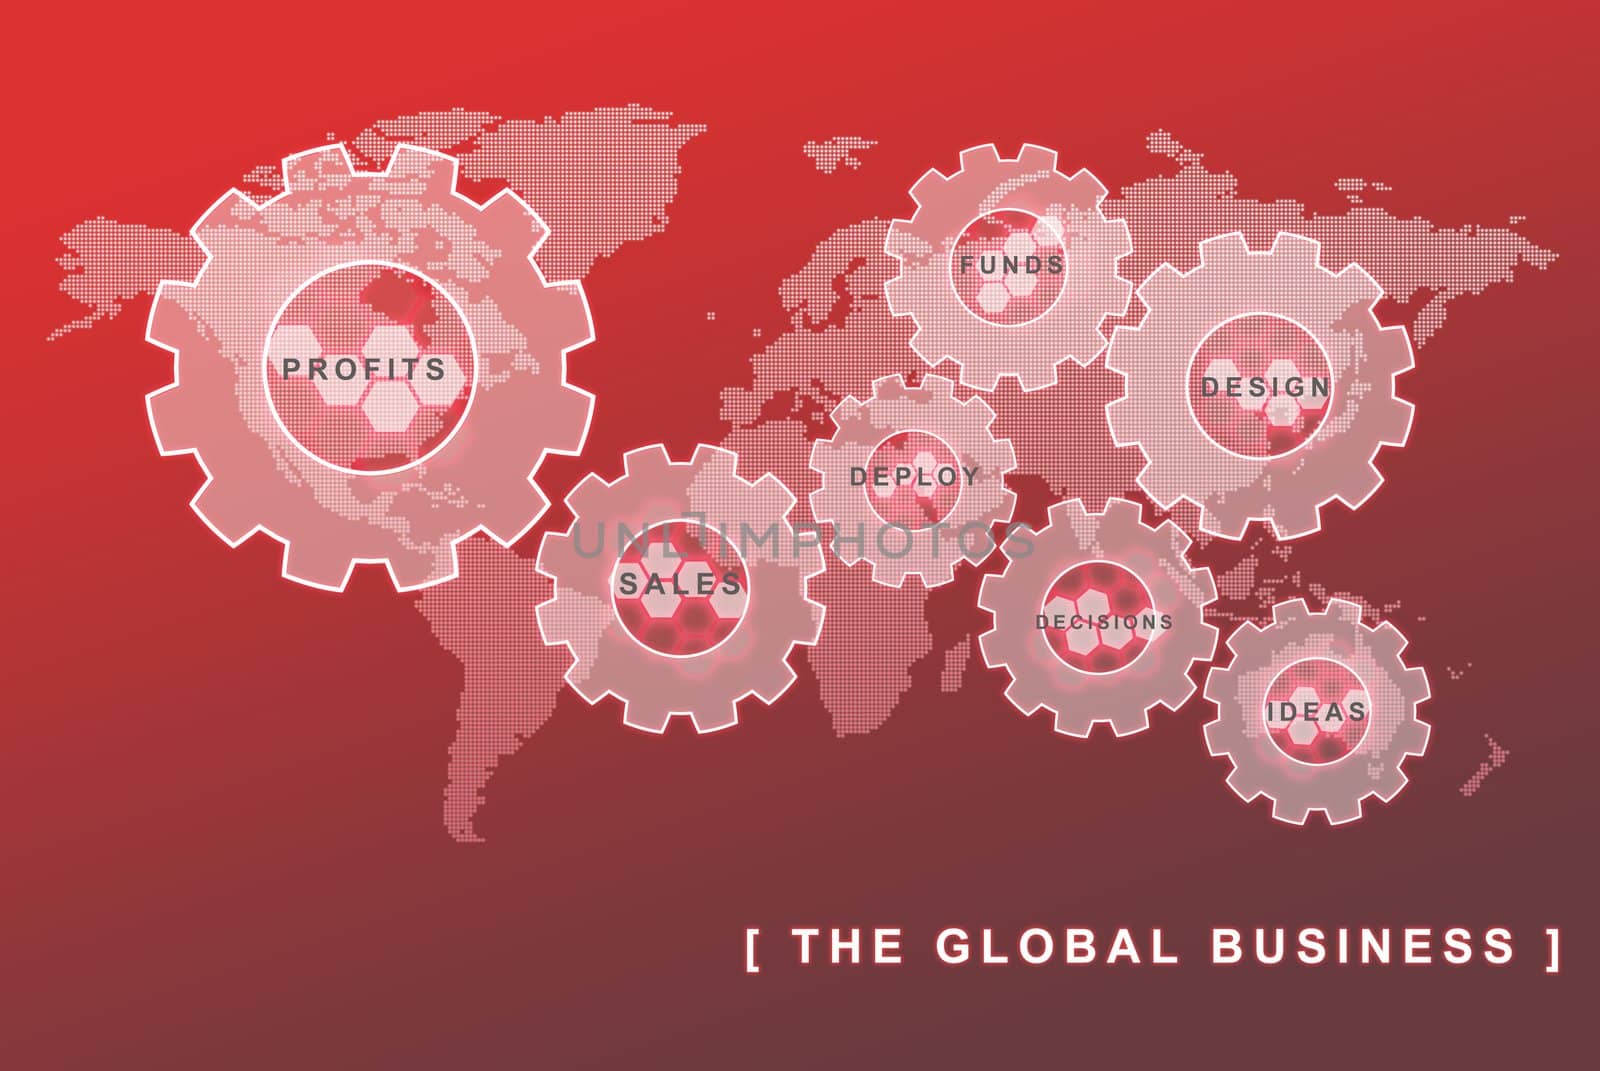 The global economy business concept by sasilsolutions